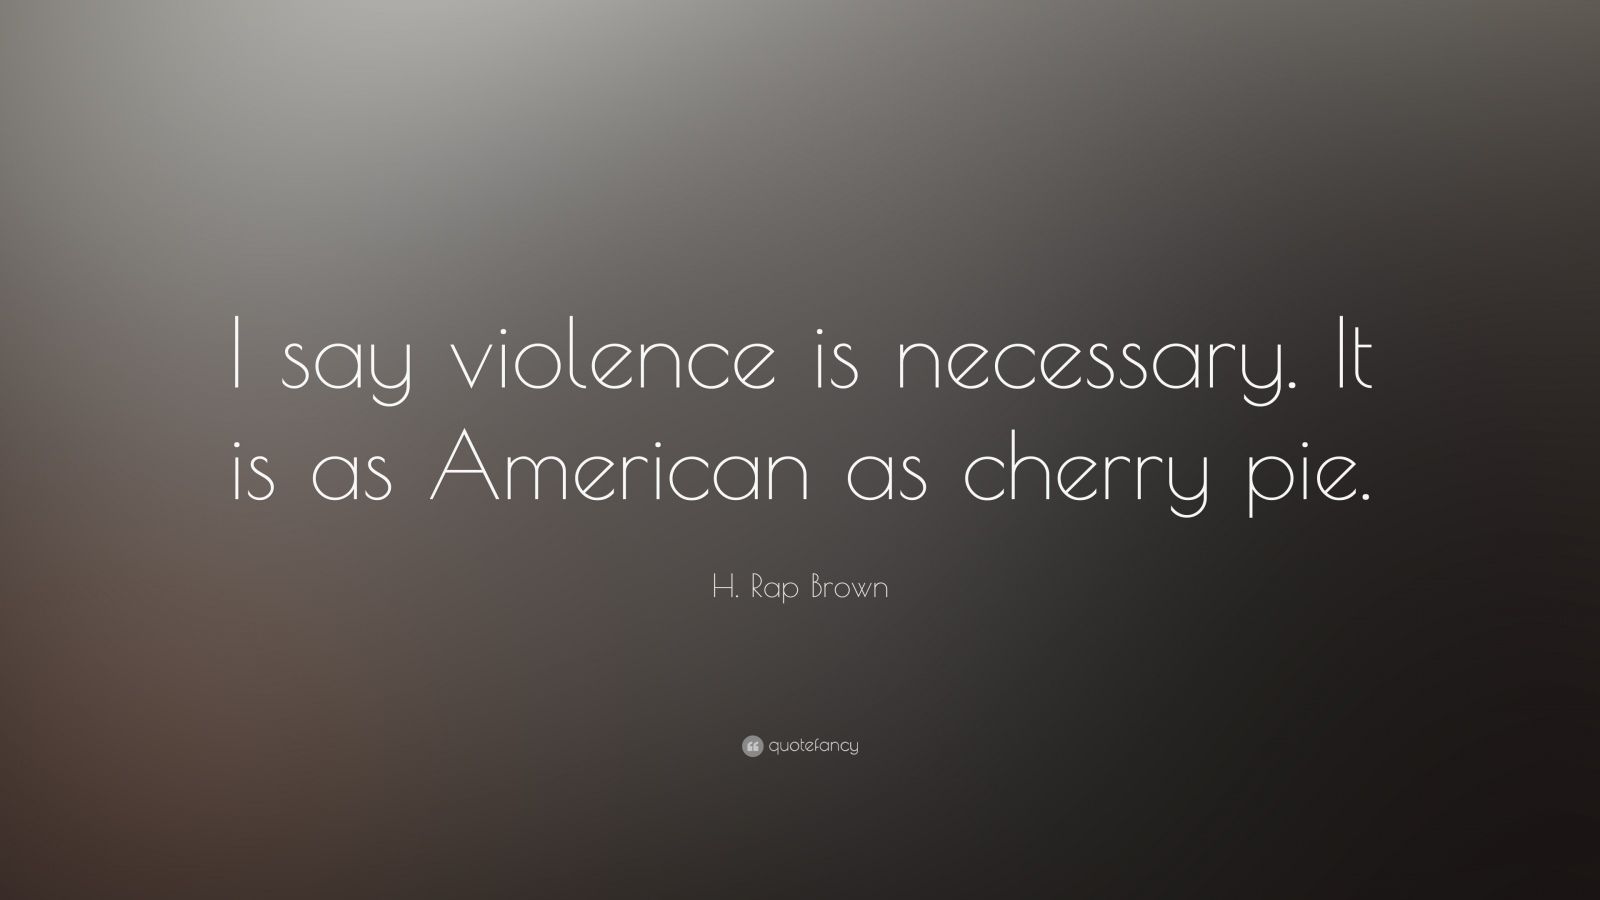 Is Violence Necessary